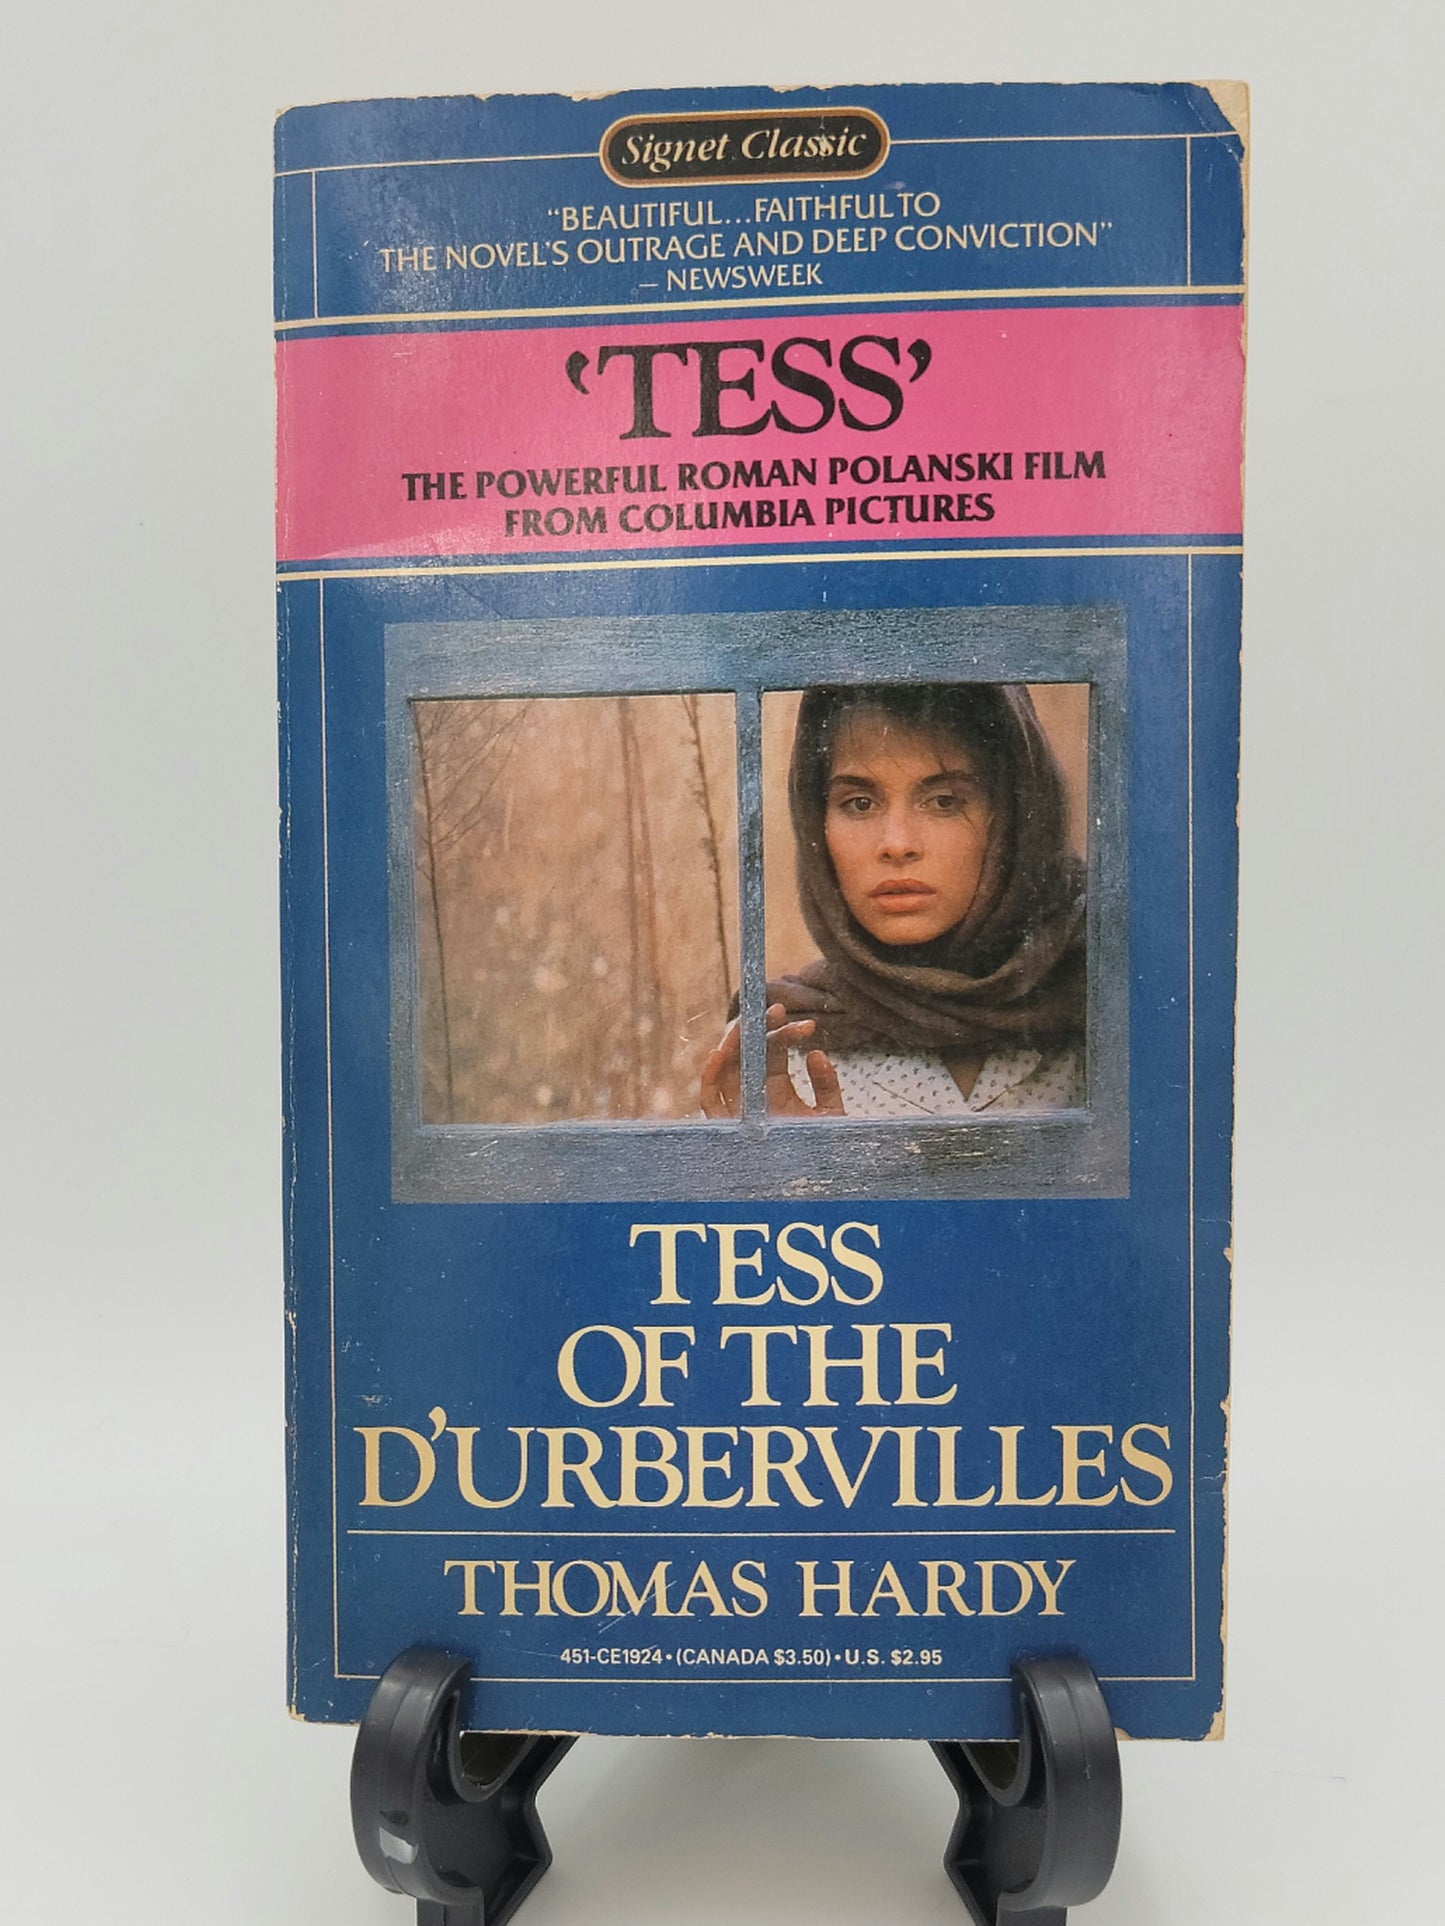 Tess of the D'urbervilles By: Thomas Hardy